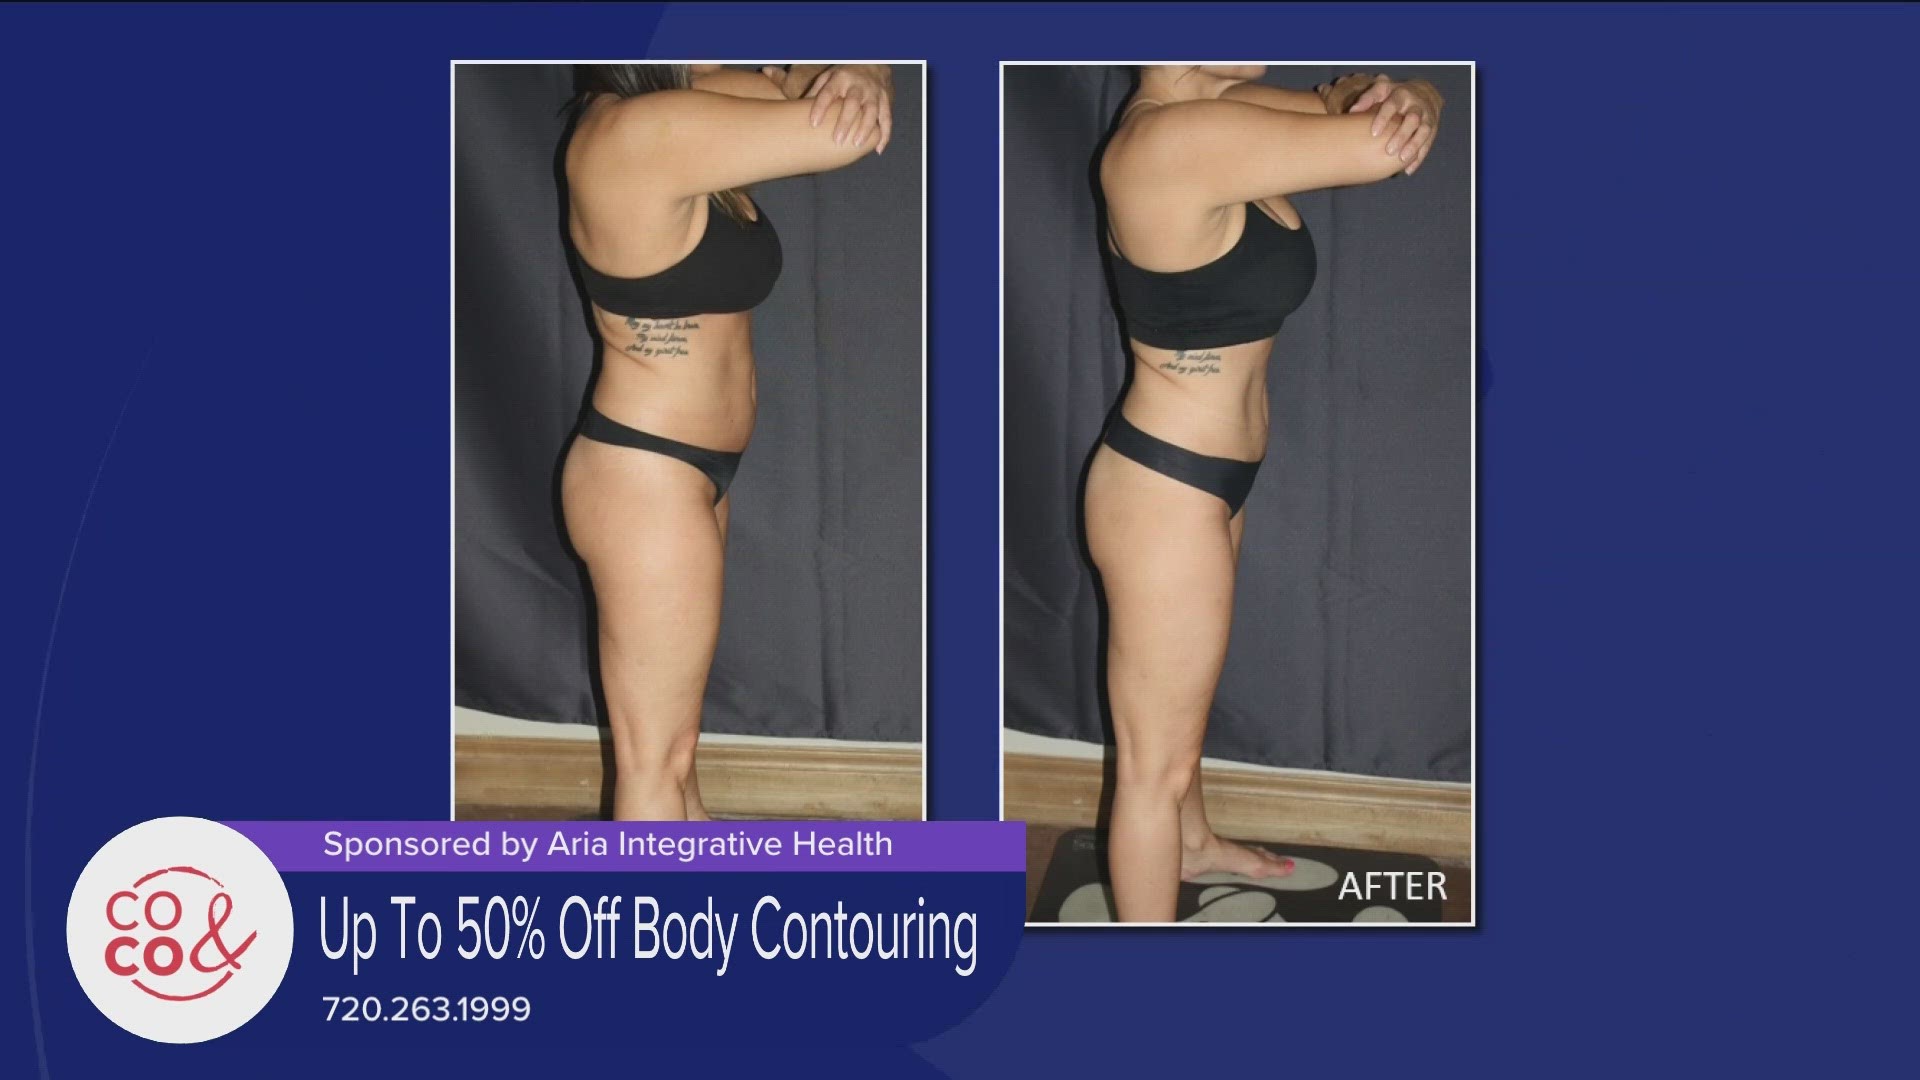 Get up to 50% off body contouring packages at Aria! Call 720.263.1999 and set up your free consultation. **PAID CONTENT**